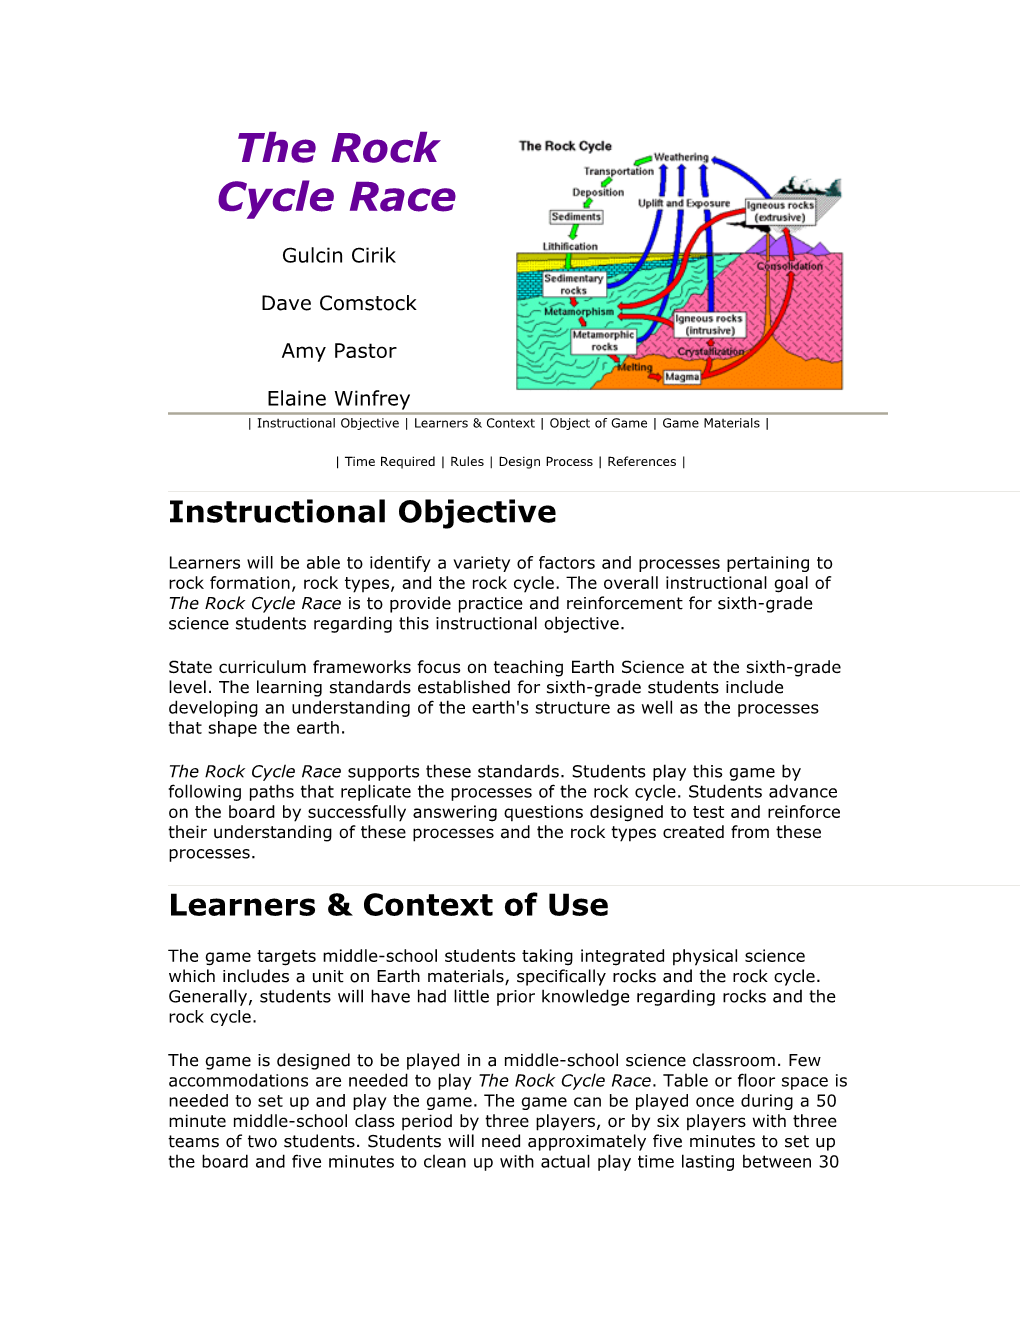 The Rock Cycle Race